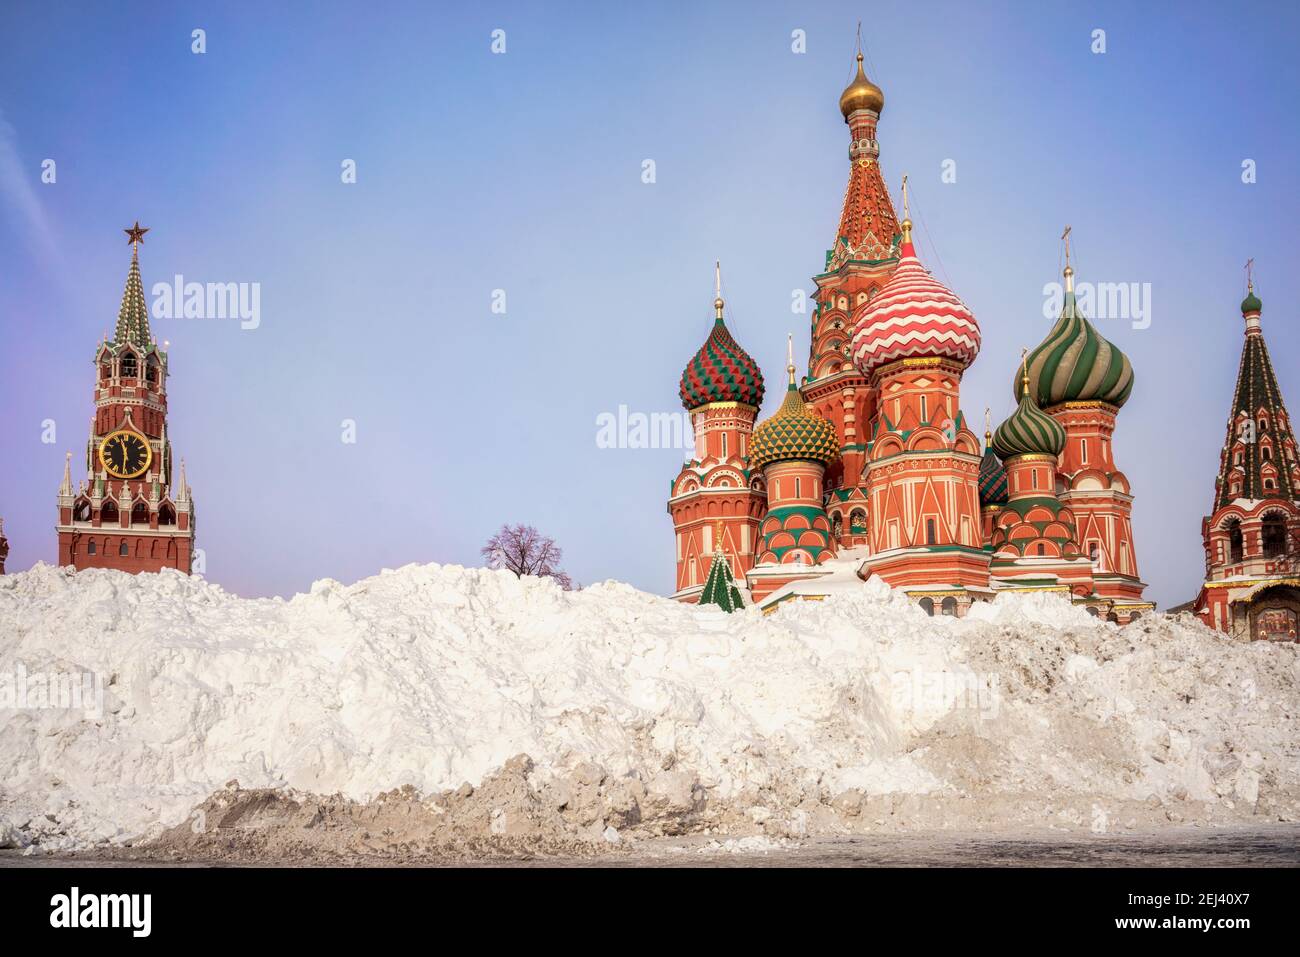 Snow pile near St. Basil's Cathedral and Spasskaya tower. Winter in Moscow, Russia. Stock Photo